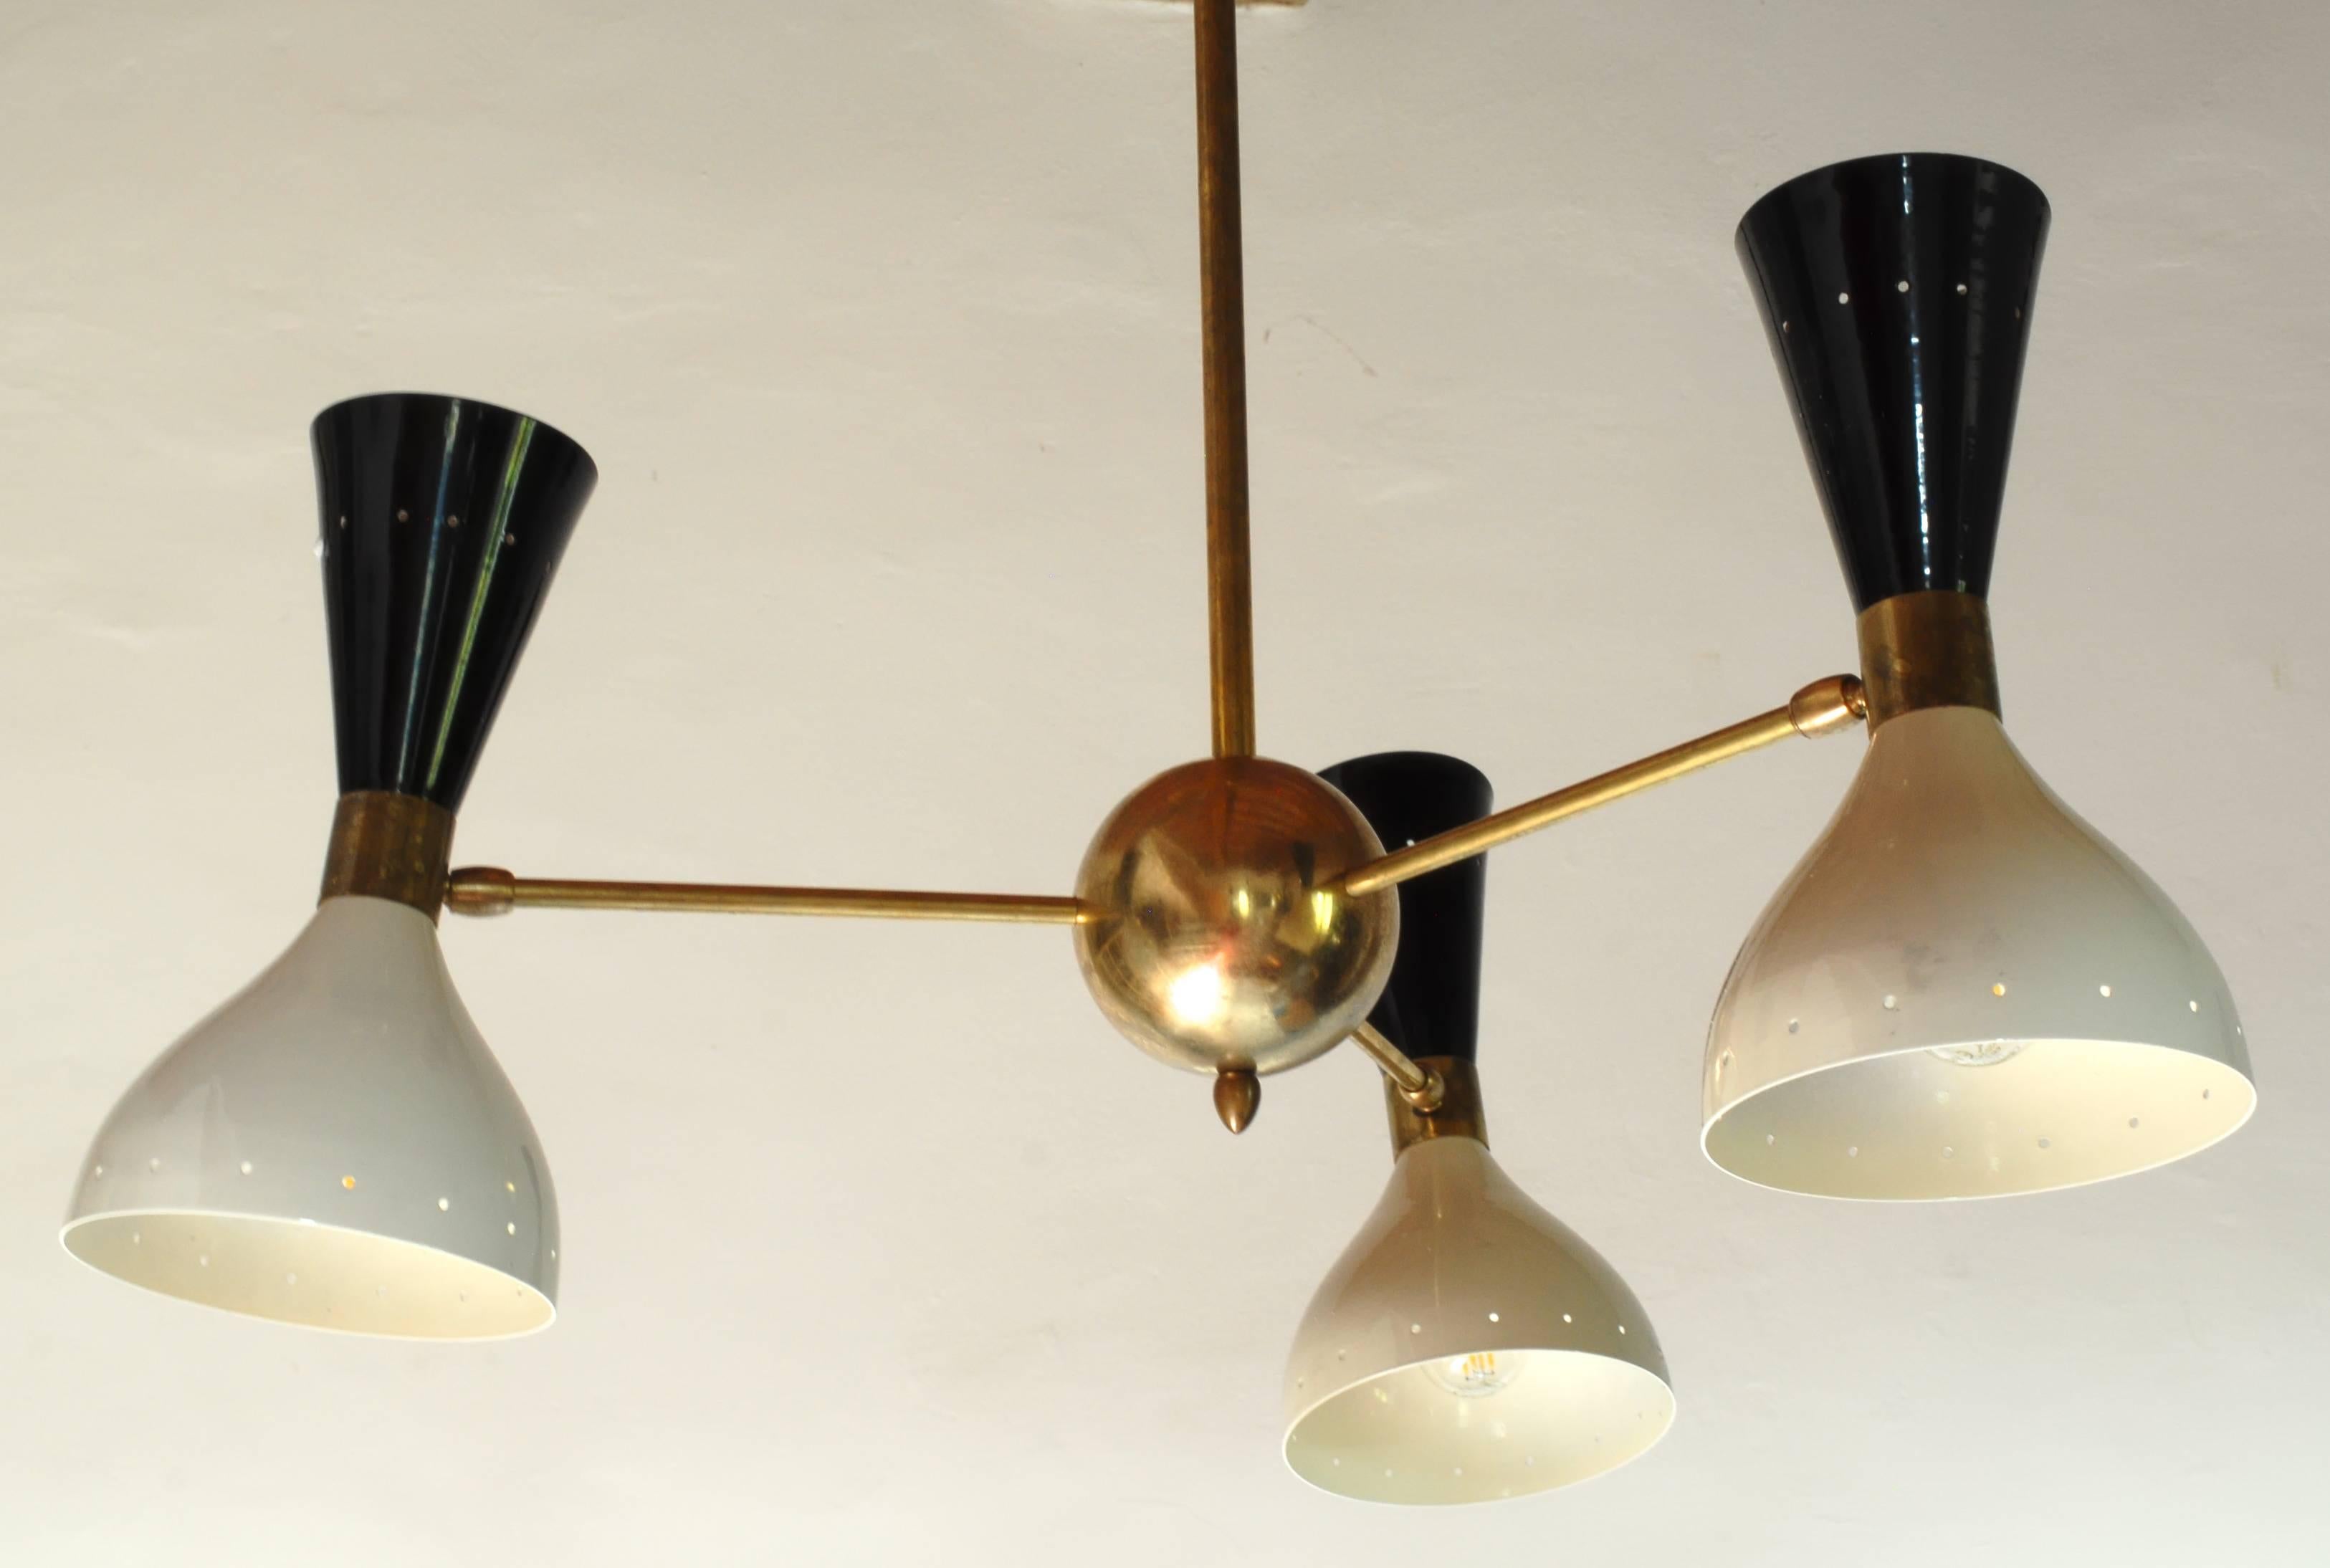 Lovely small chandelier for entries or corridors. Midcentury cluster three-arm chandelier with a Classic two-tone head.
 
Made by a lab specialized in midcentury restoration. Owner is a collector himself and connoisseur of the period. This